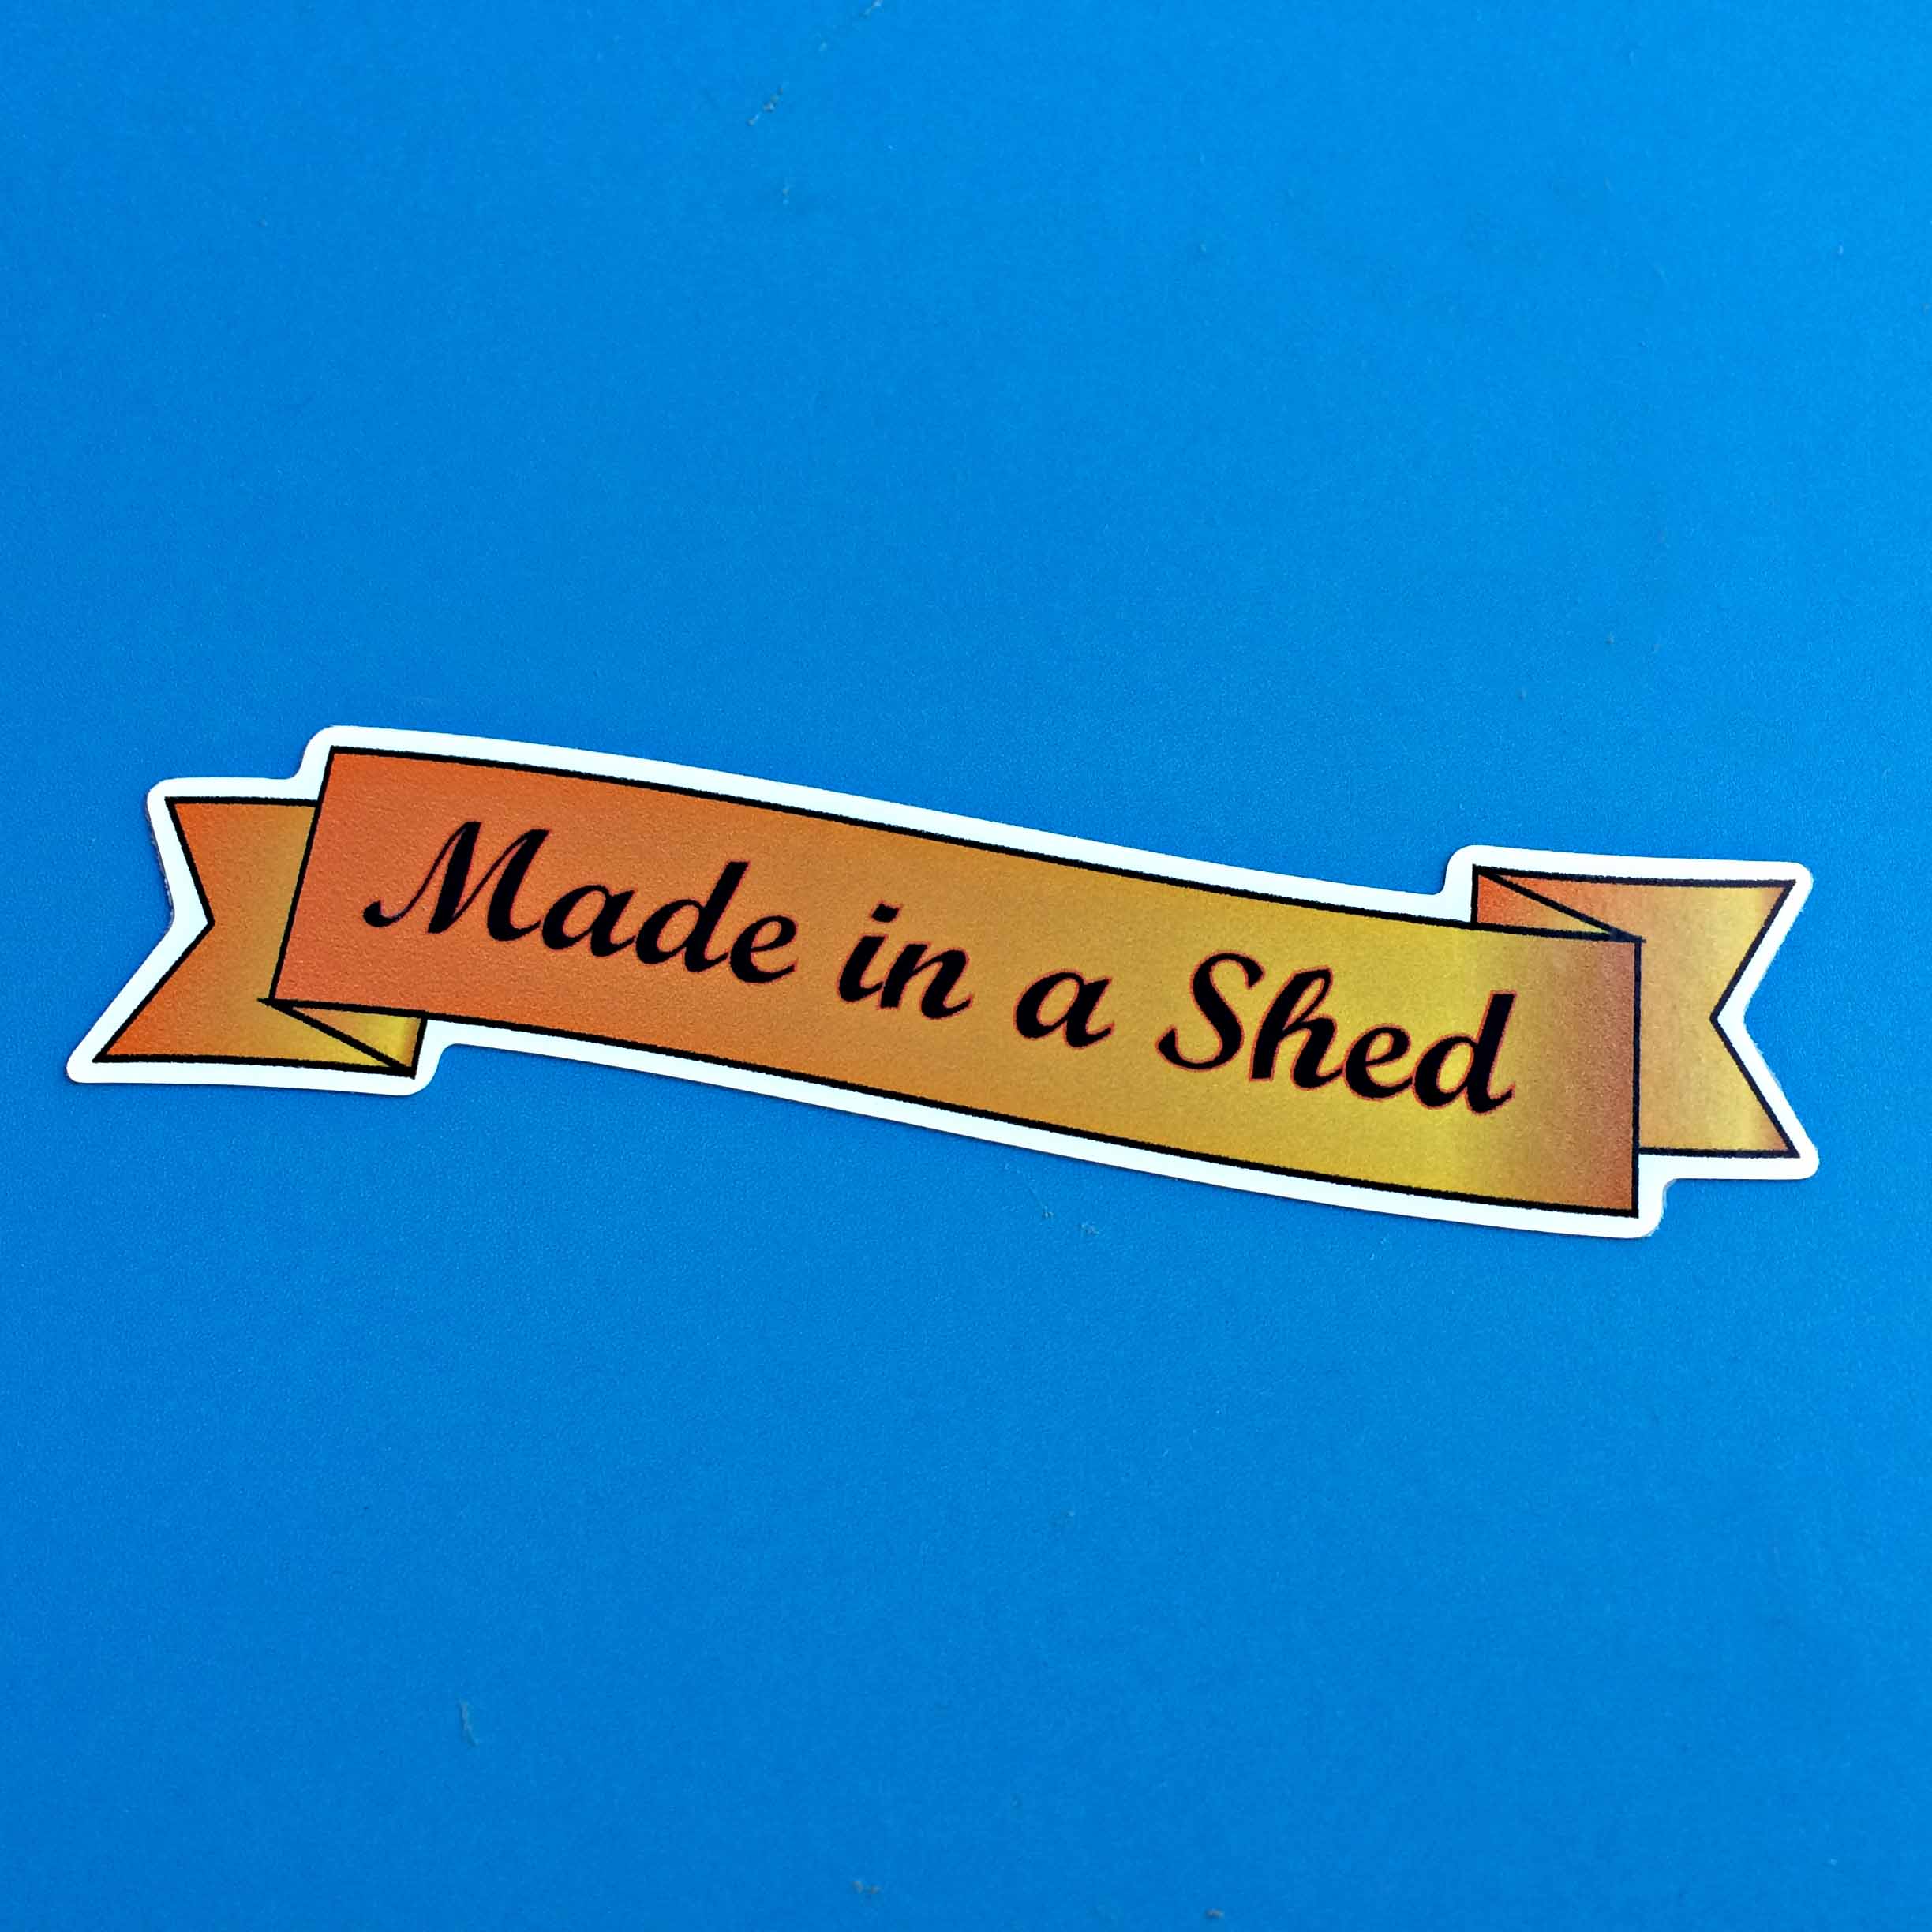 Made in a Shed handwritten font in black on a gold length of ribbon.